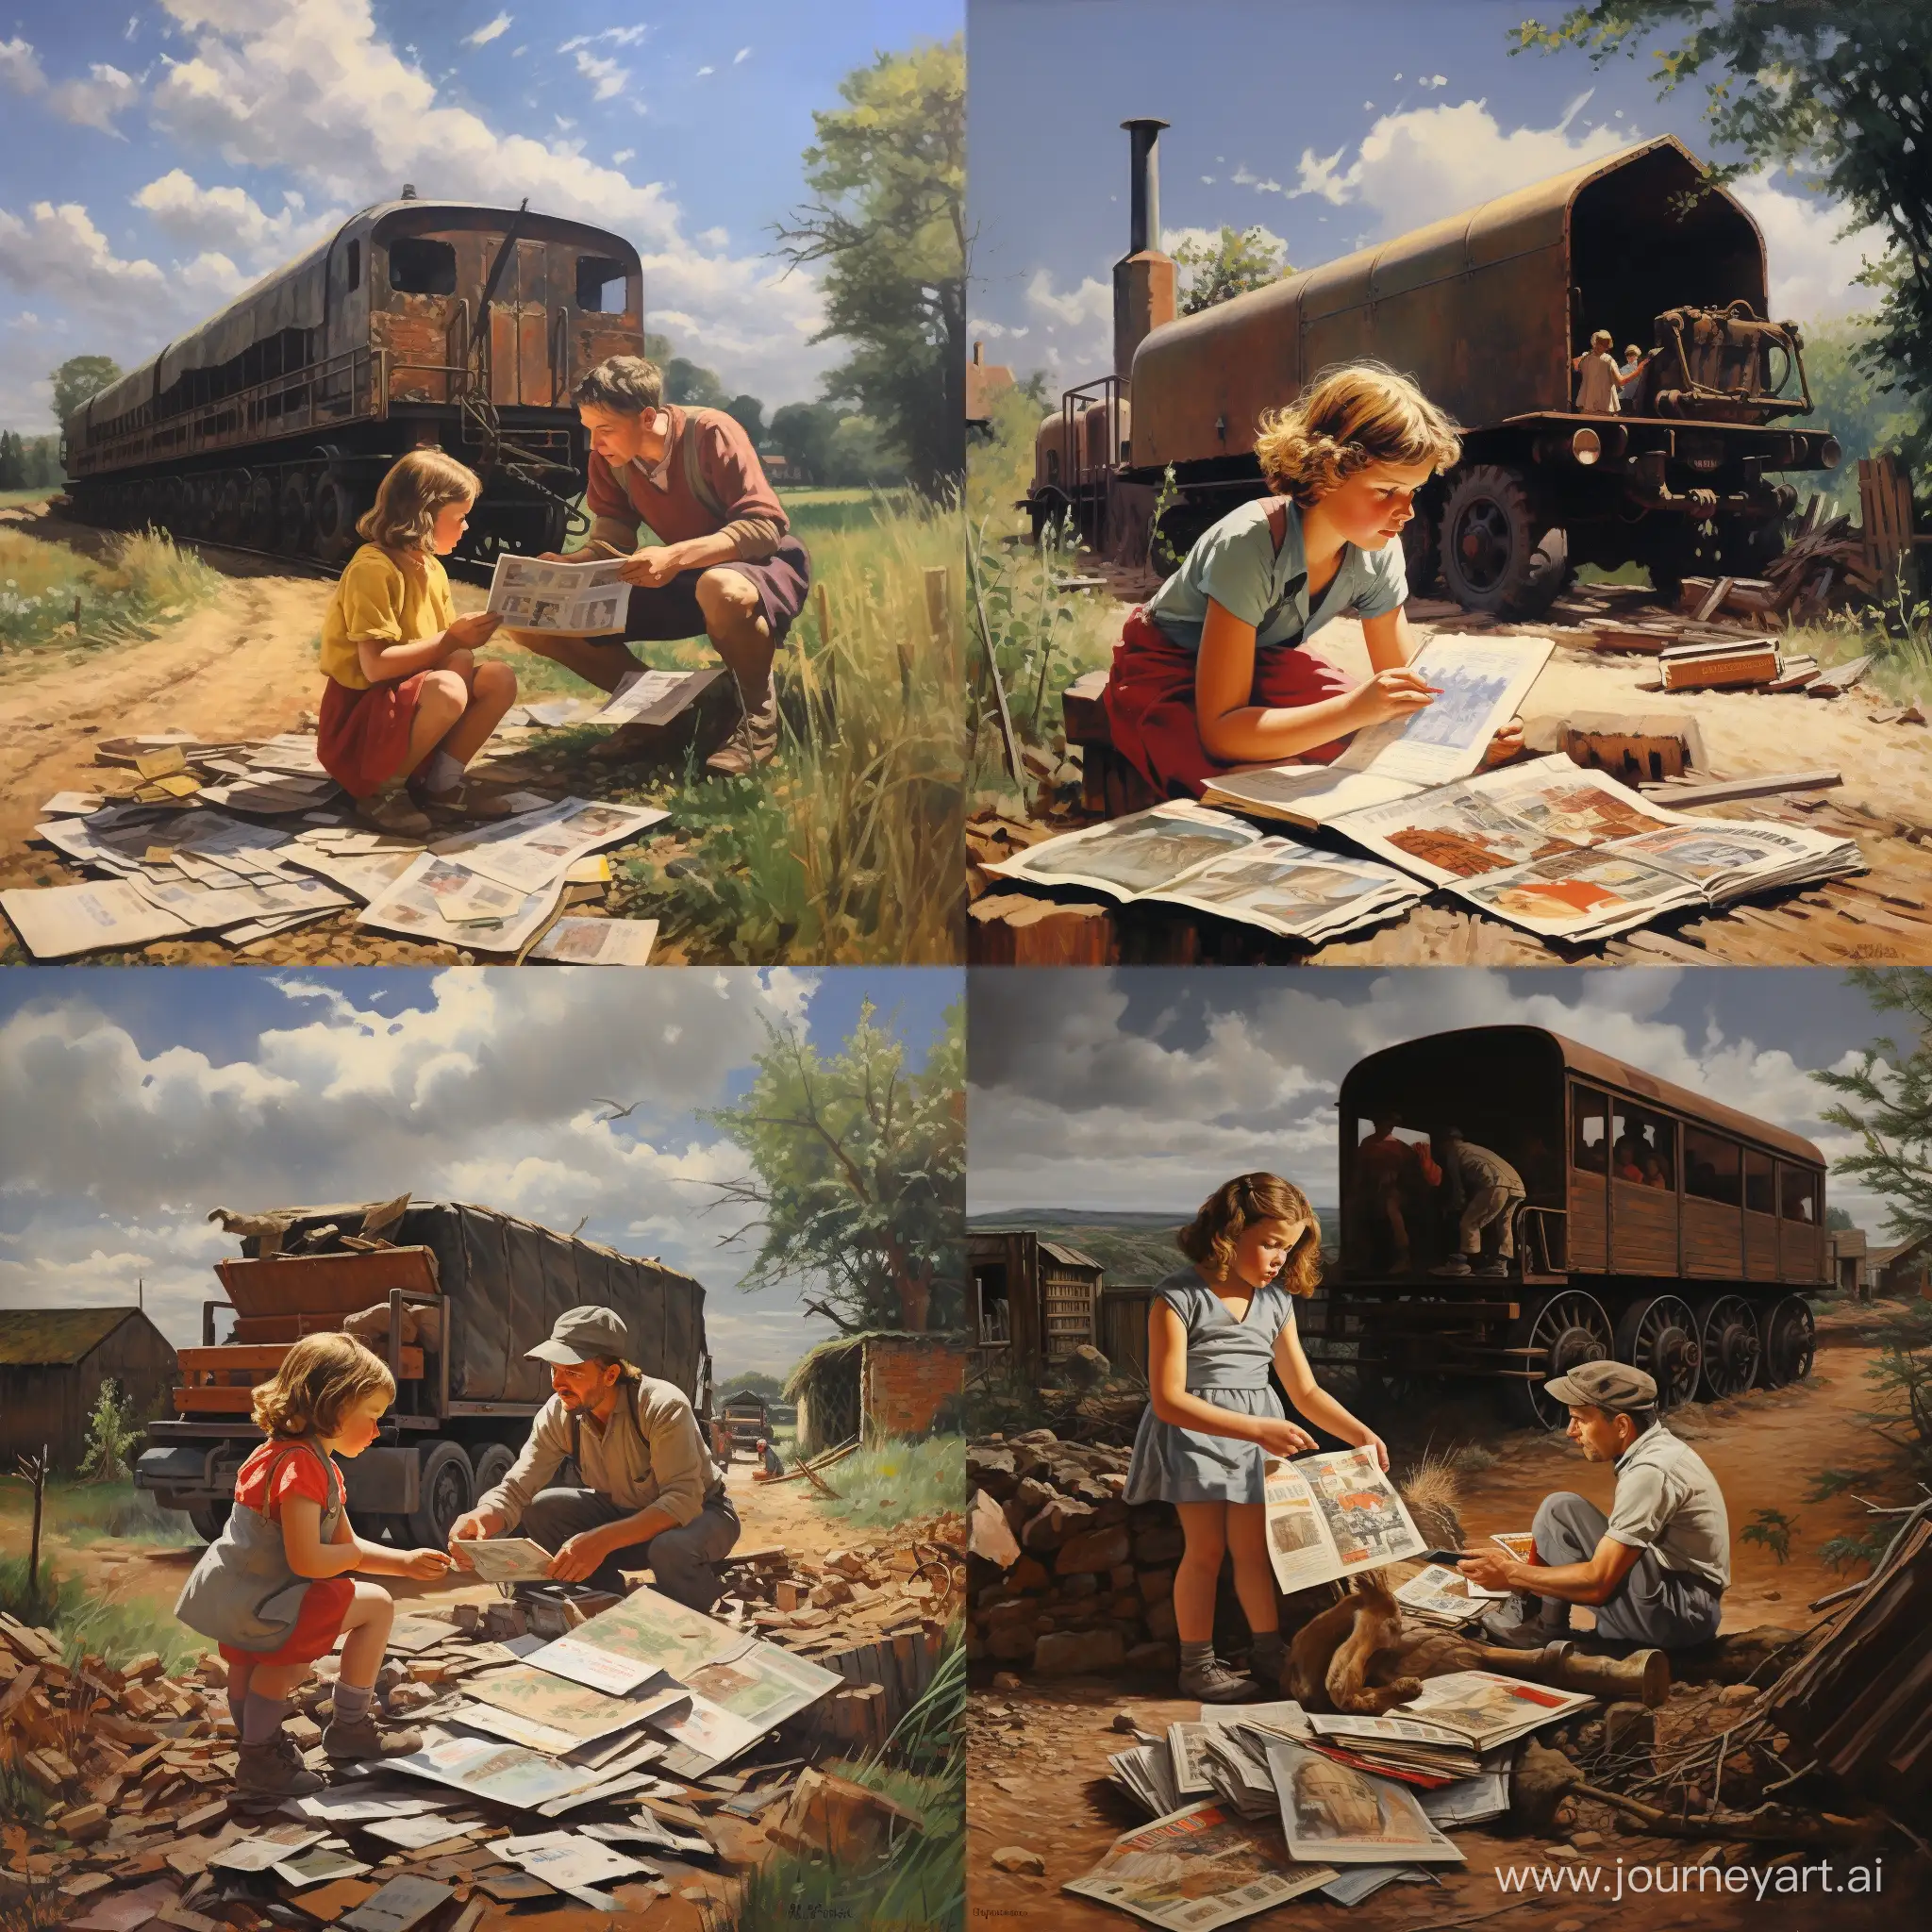 A World War II era lorry delivering large corrugated iron sheets and a pile of nuts and bolts for an Anderson Shelter. A child looks on with curiosity, holding an instruction booklet